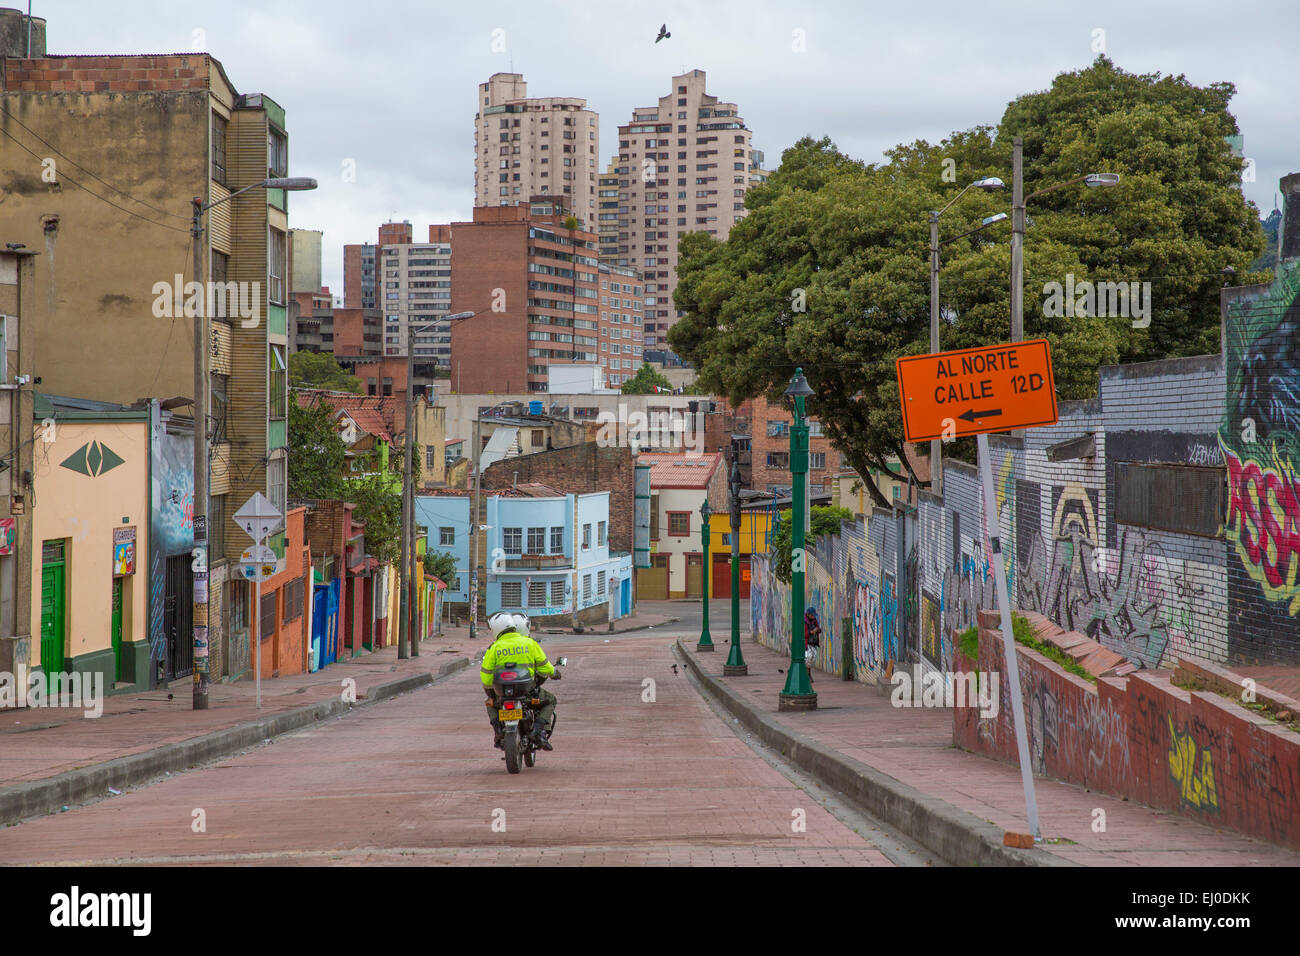 South America, Latin America, Colombia, town, city, towns, cities, town view, Bogota, capital, street, houses, homes, Stock Photo